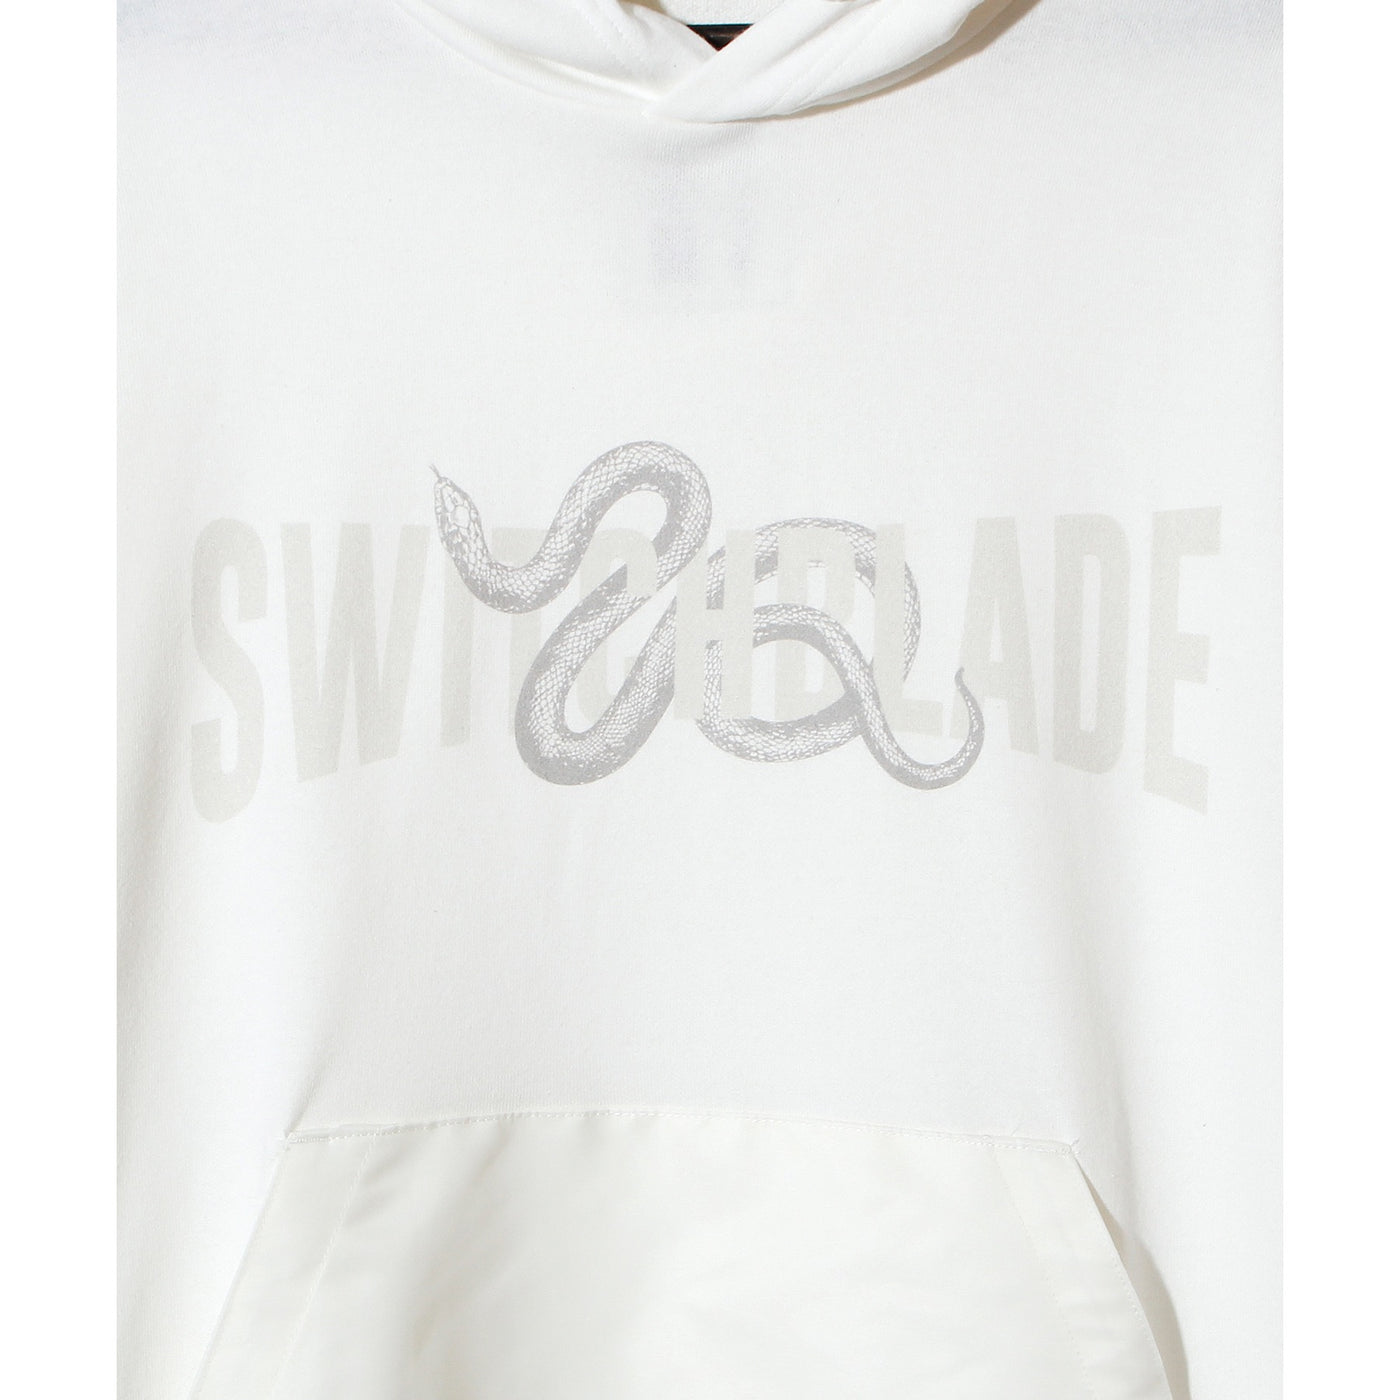 SNAKES AND CURVED LETTERS PARKA / WHITE